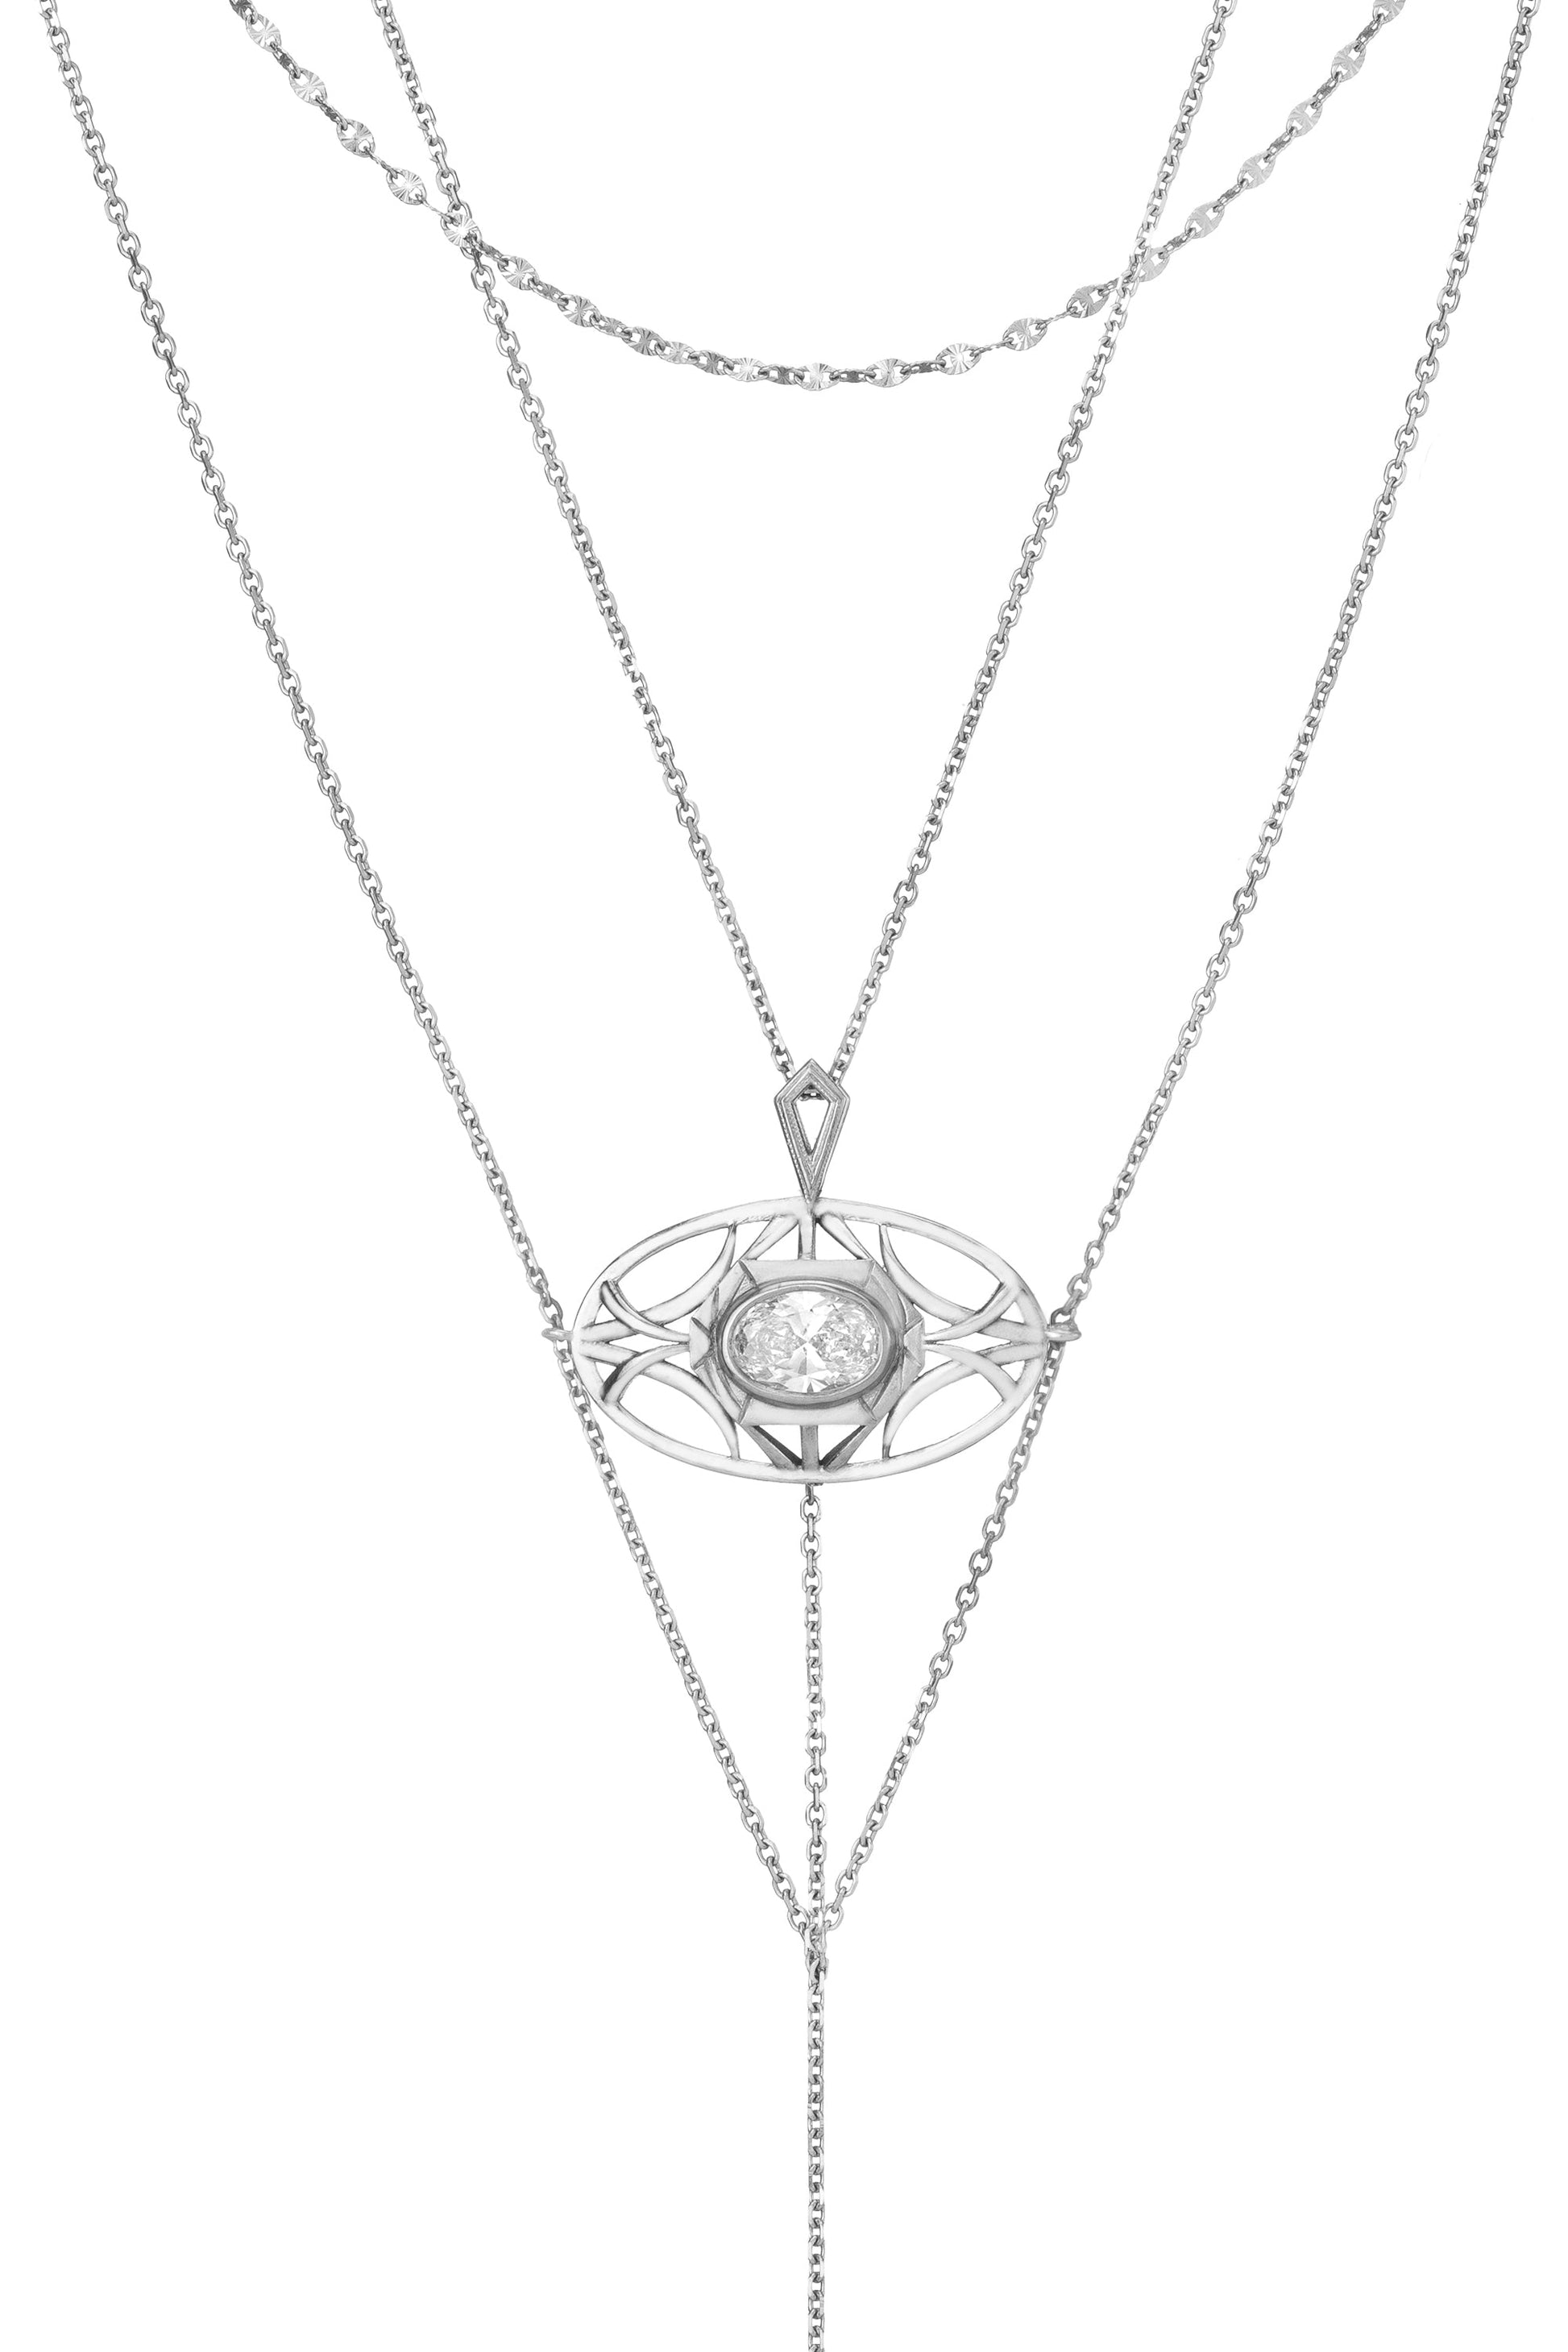 VIVIANA LANGHOFF-Air Multilayered Necklace-WHITE GOLD